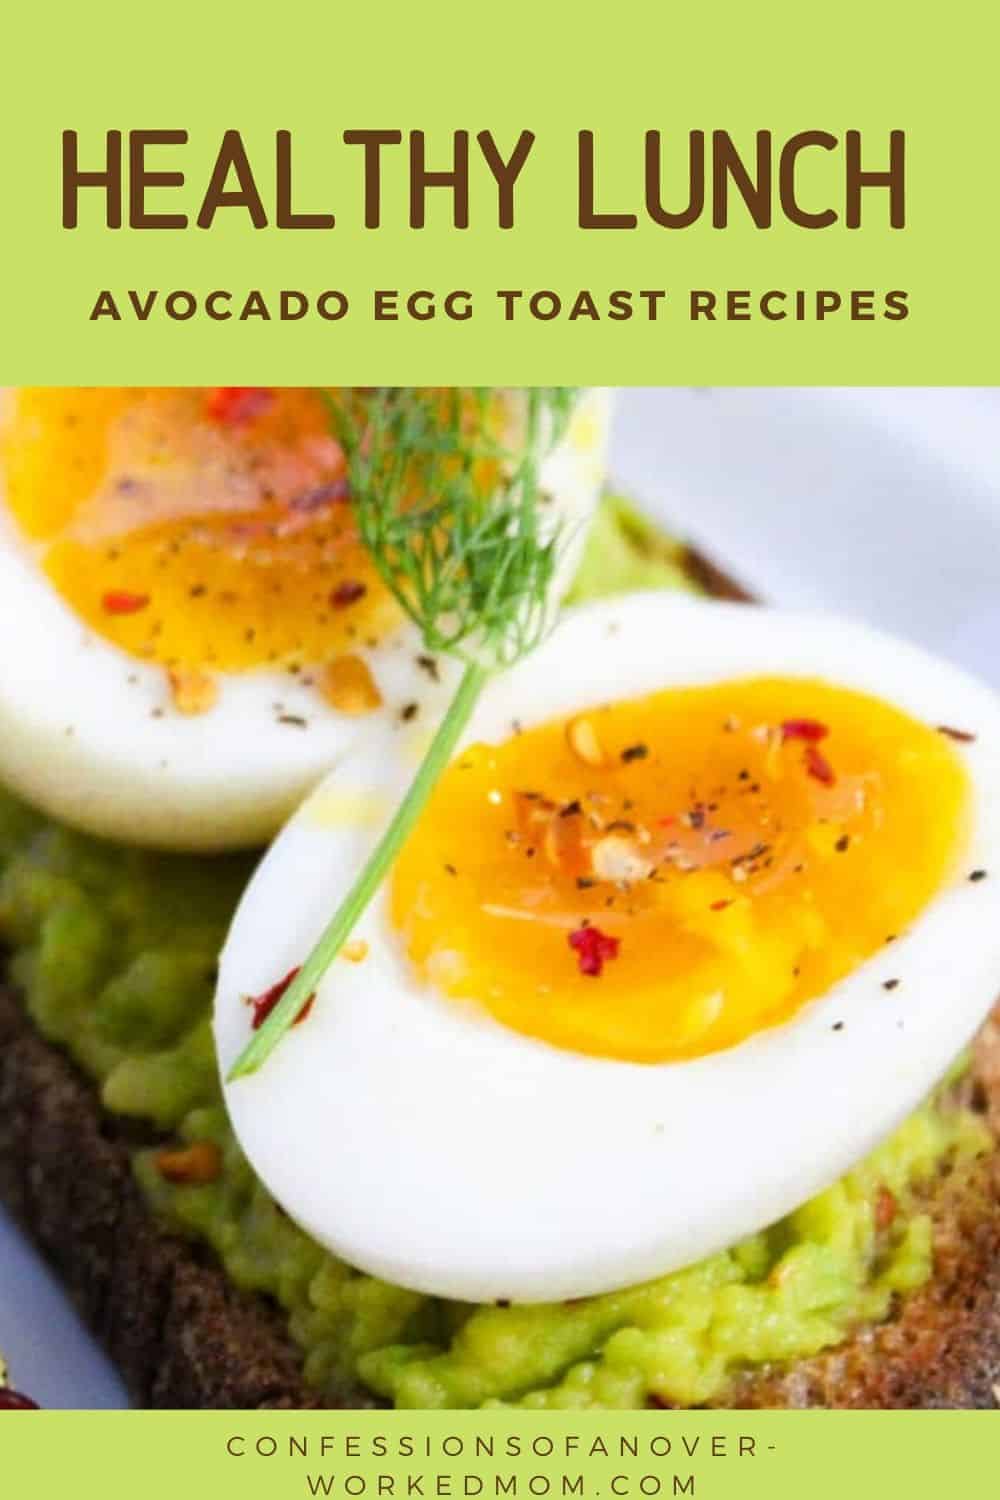 Looking for an easy avocado recipe? Try this avocado egg toast sandwich recipe and see how many ways you can enjoy it today